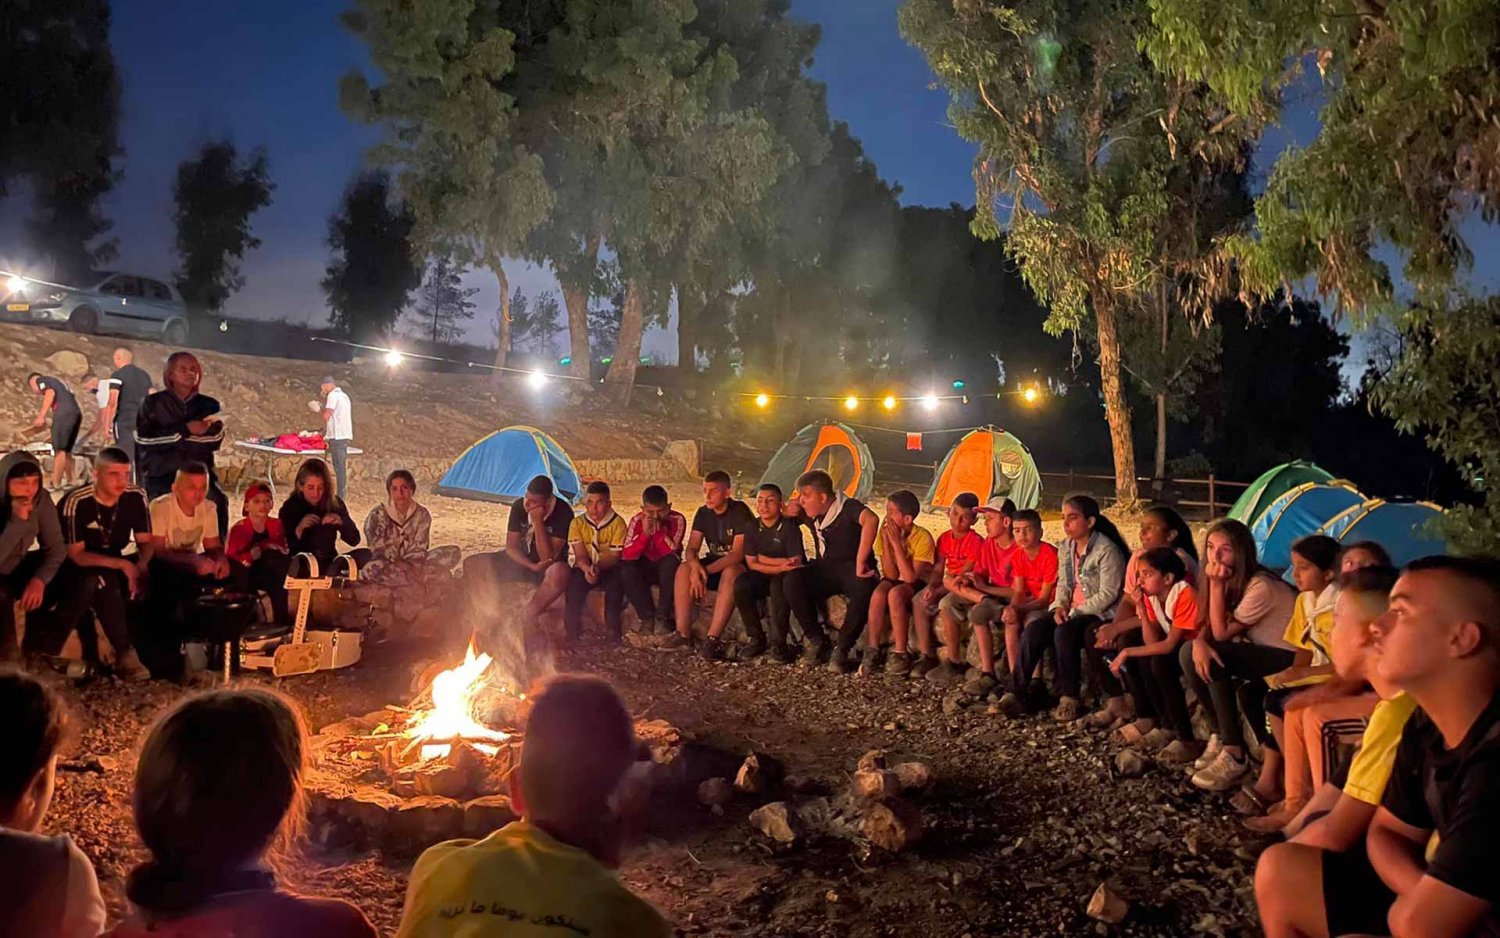 Campers enjoy a campfire party during “Silwan Summer 2022,” a youth camp for the al-Bustan district scout group